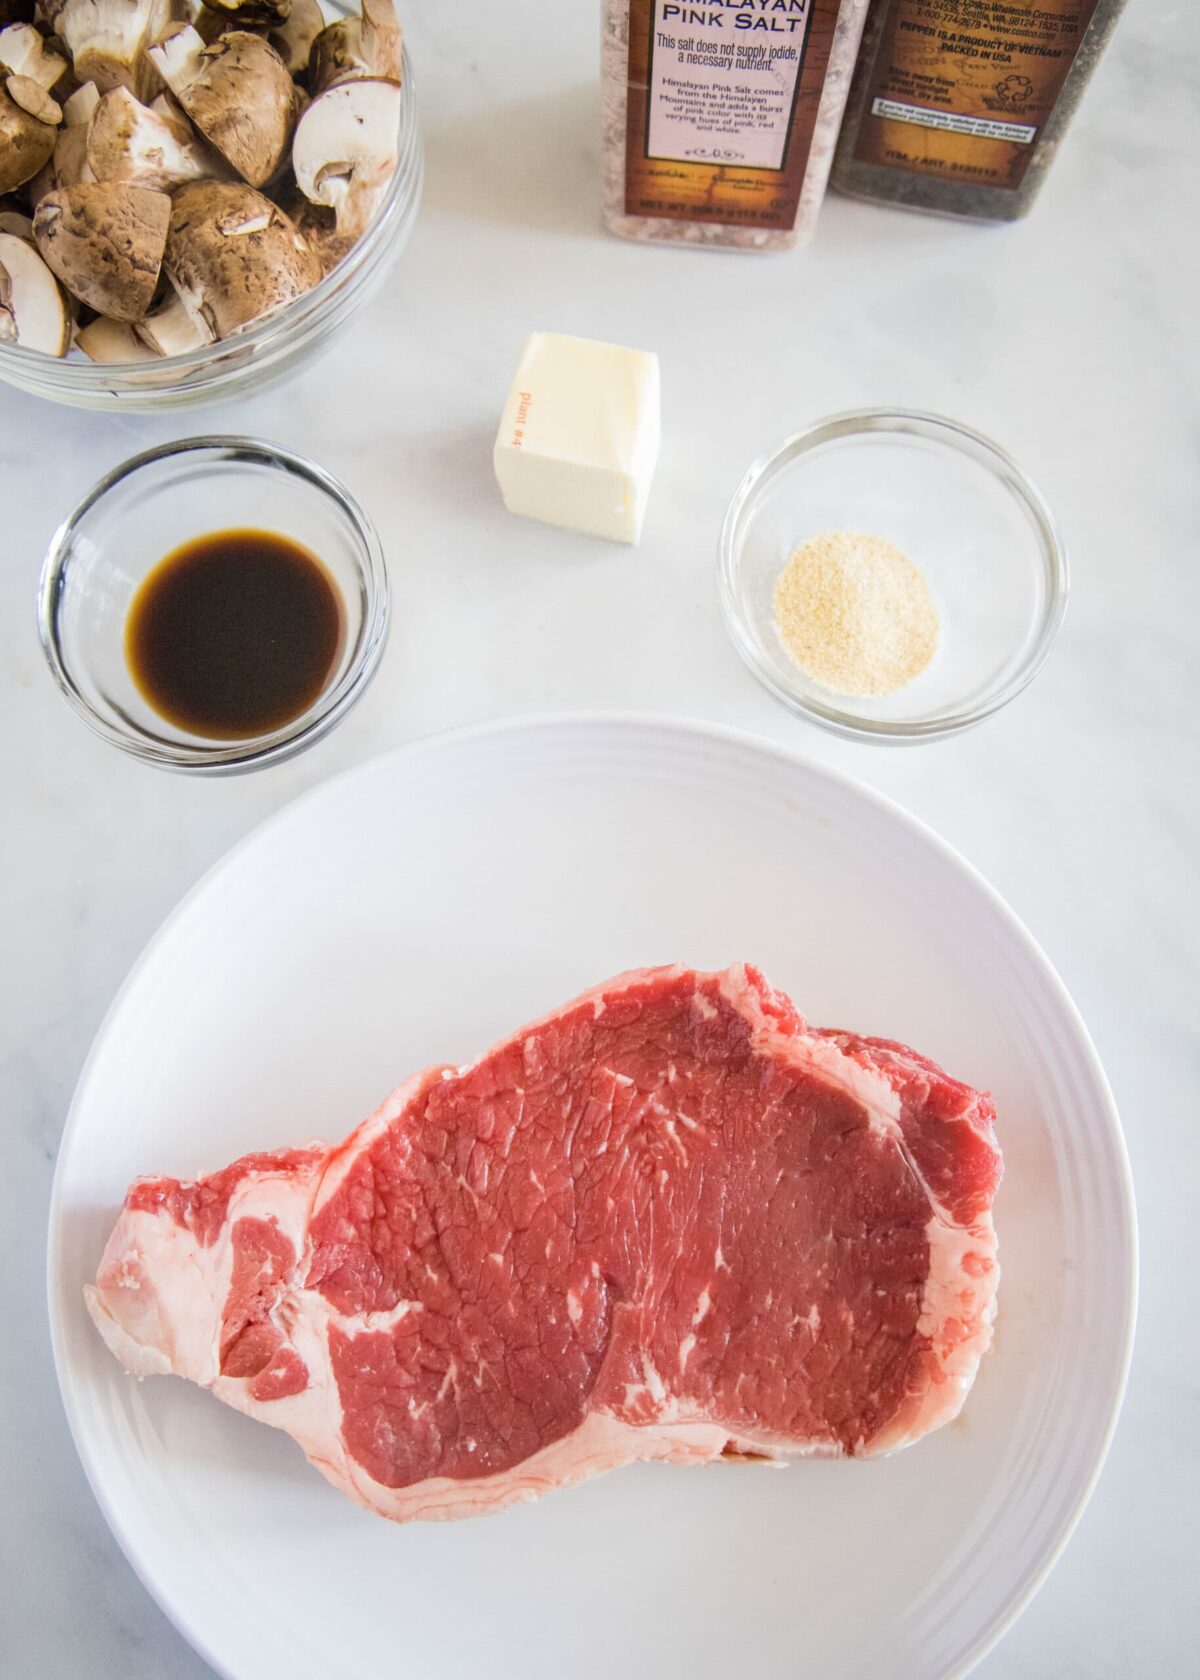 Overhead view of the ingredients needed for air fryer steak: A raw steak on a plate, a bowl of mushrooms, a knob of butter, a bowl of garlic powder, a bowl of Worcestershire sauce, a bottle of salt and a bottle of pepper